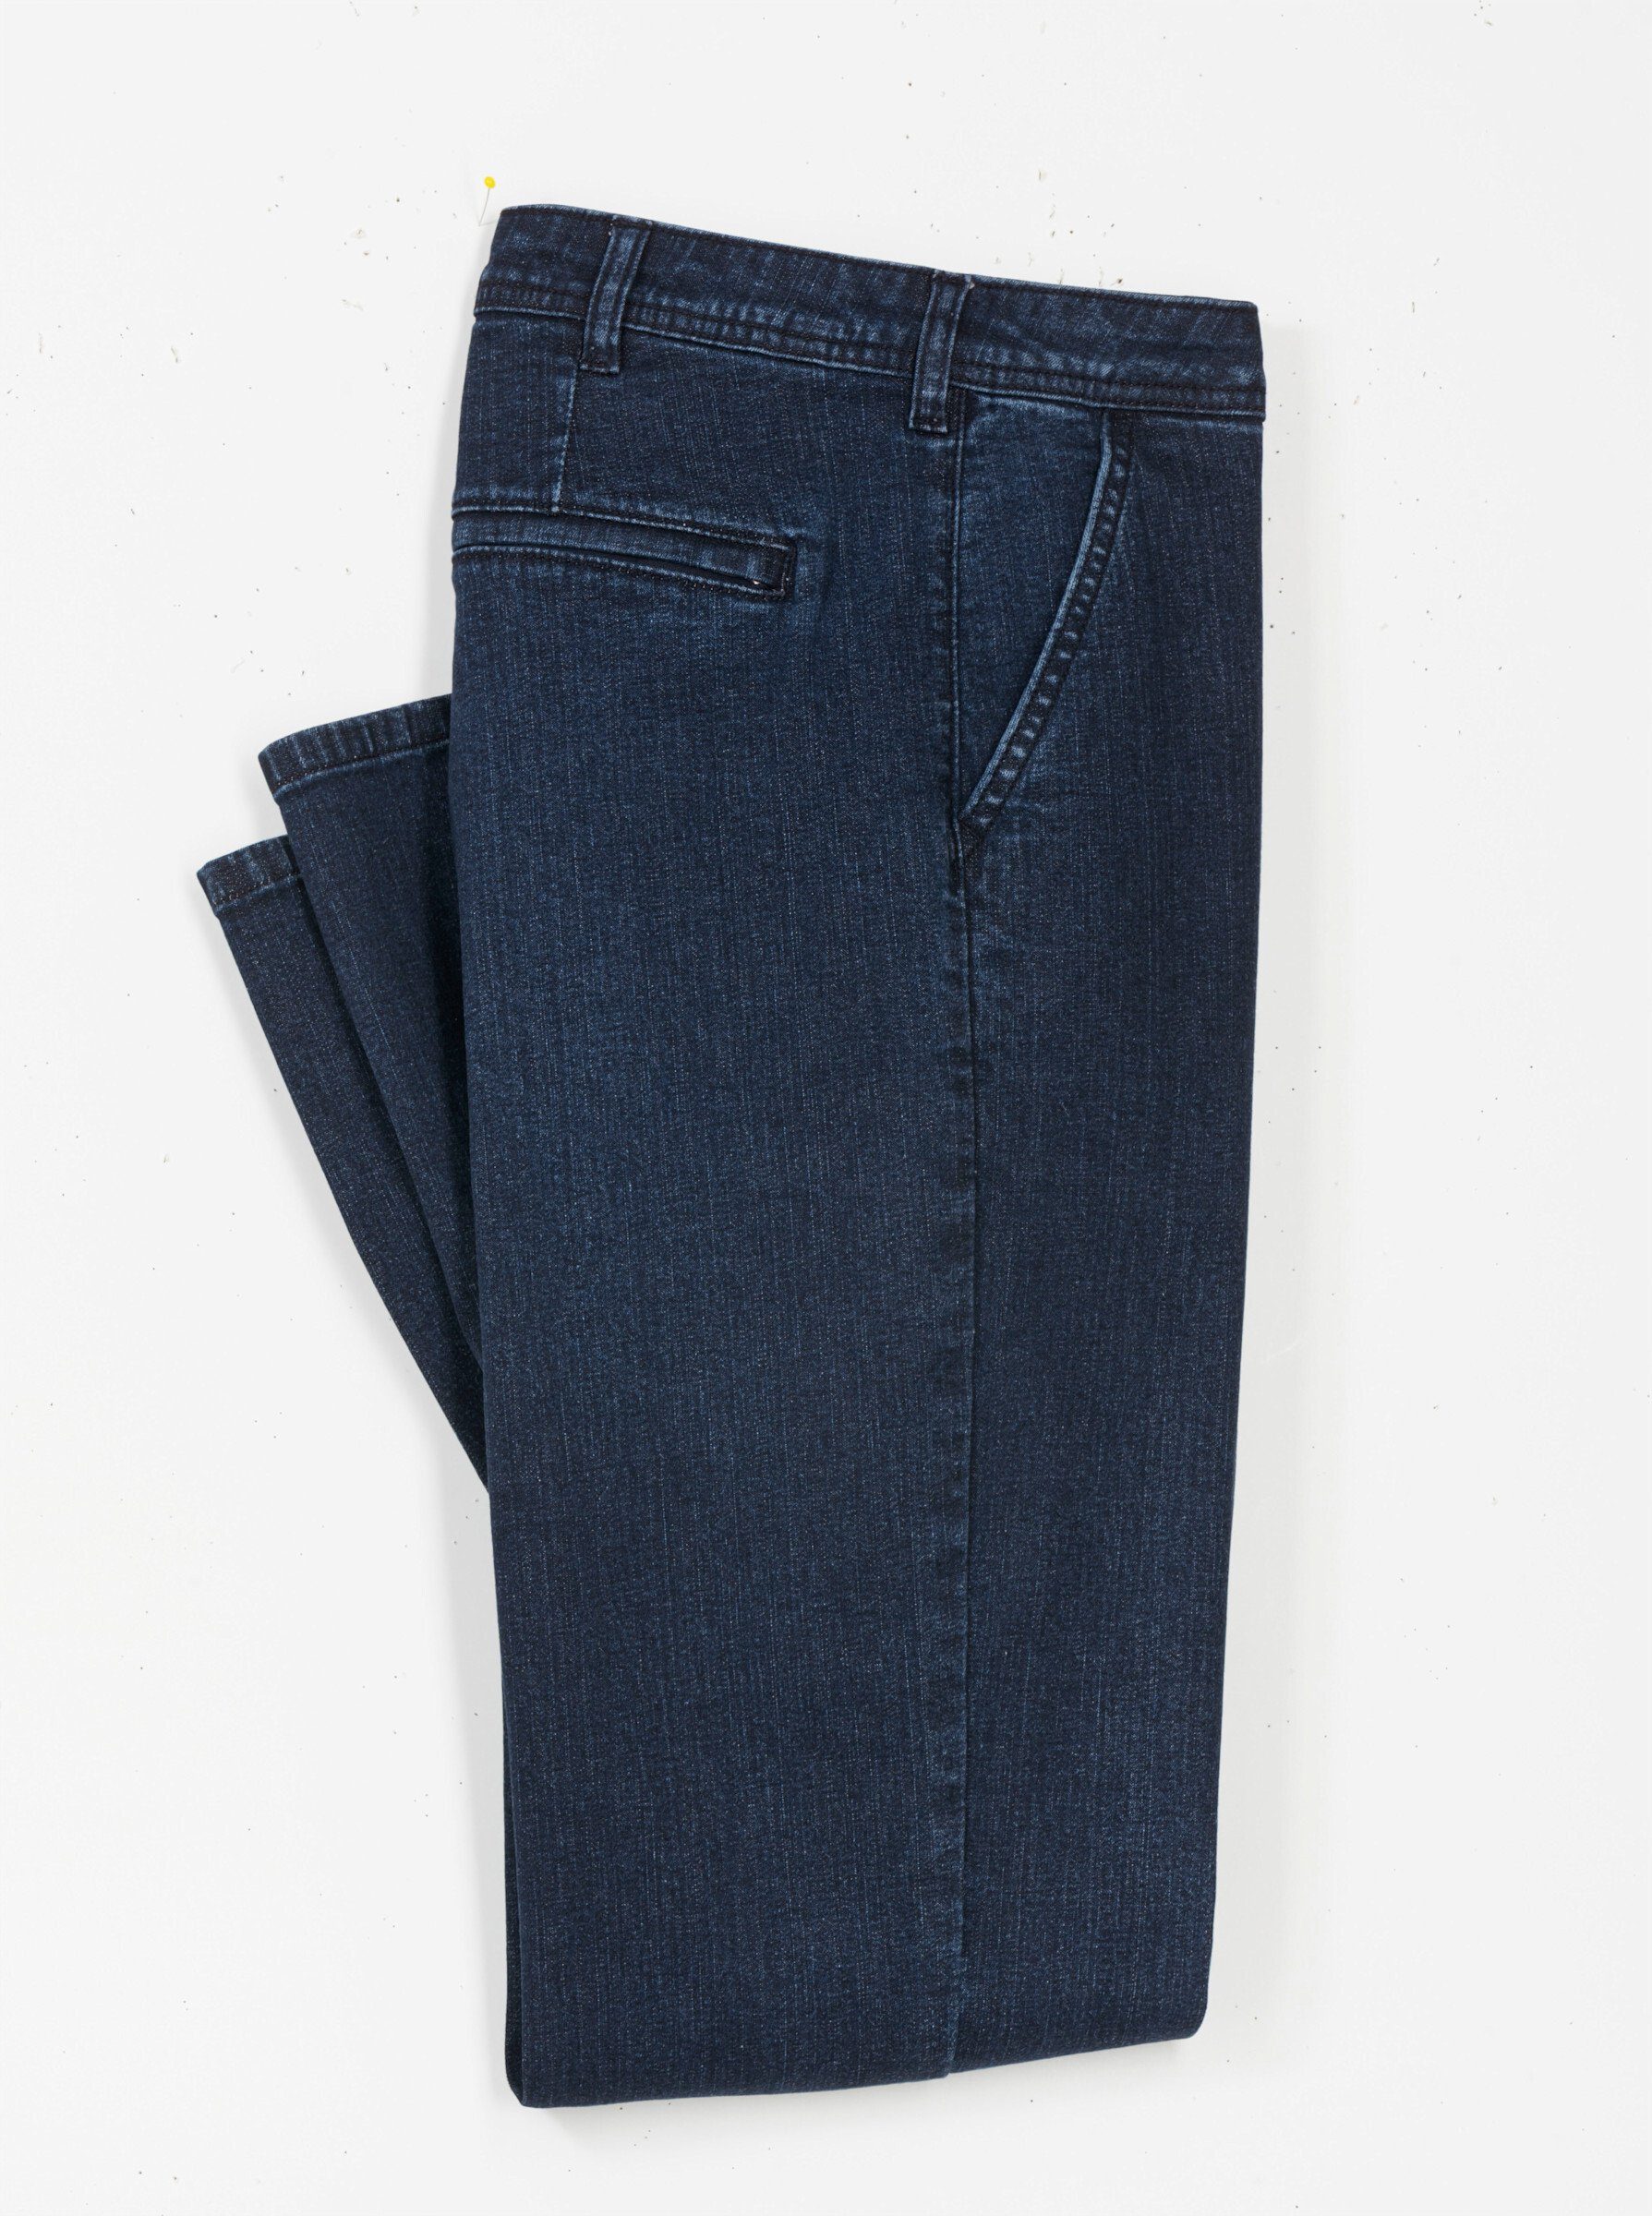 Sieh an! Jeans blue-stone-washed Bequeme